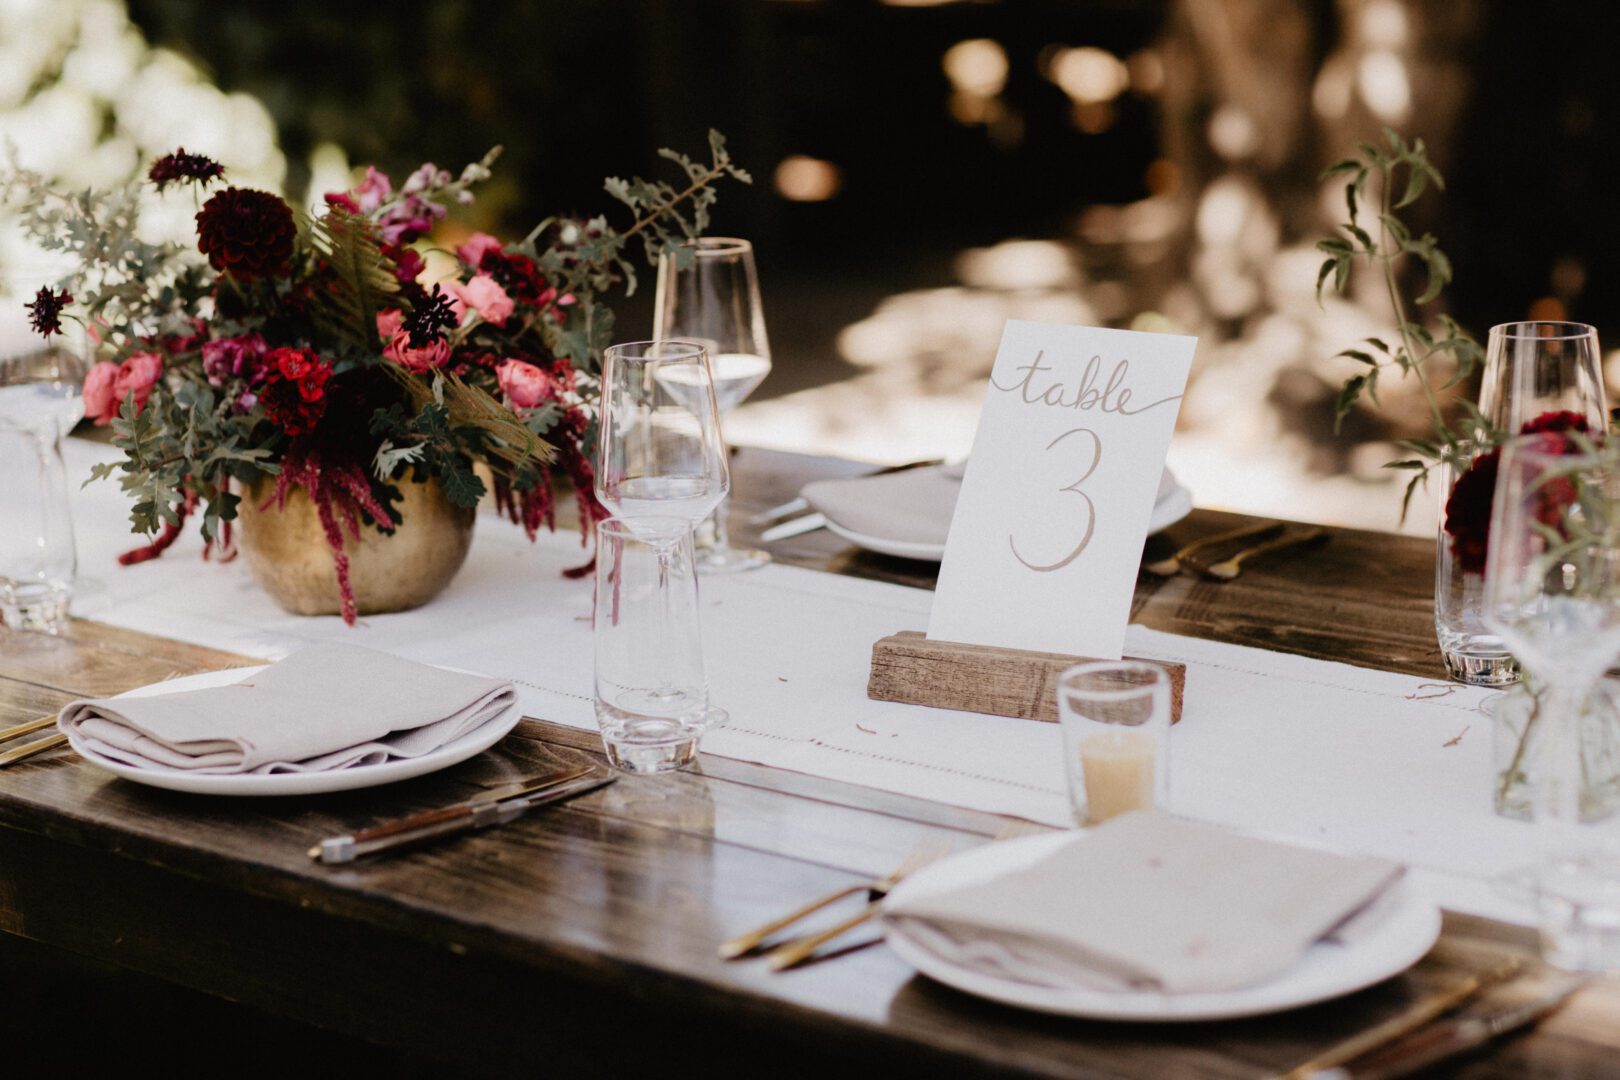 A table setting with a number and flowers.